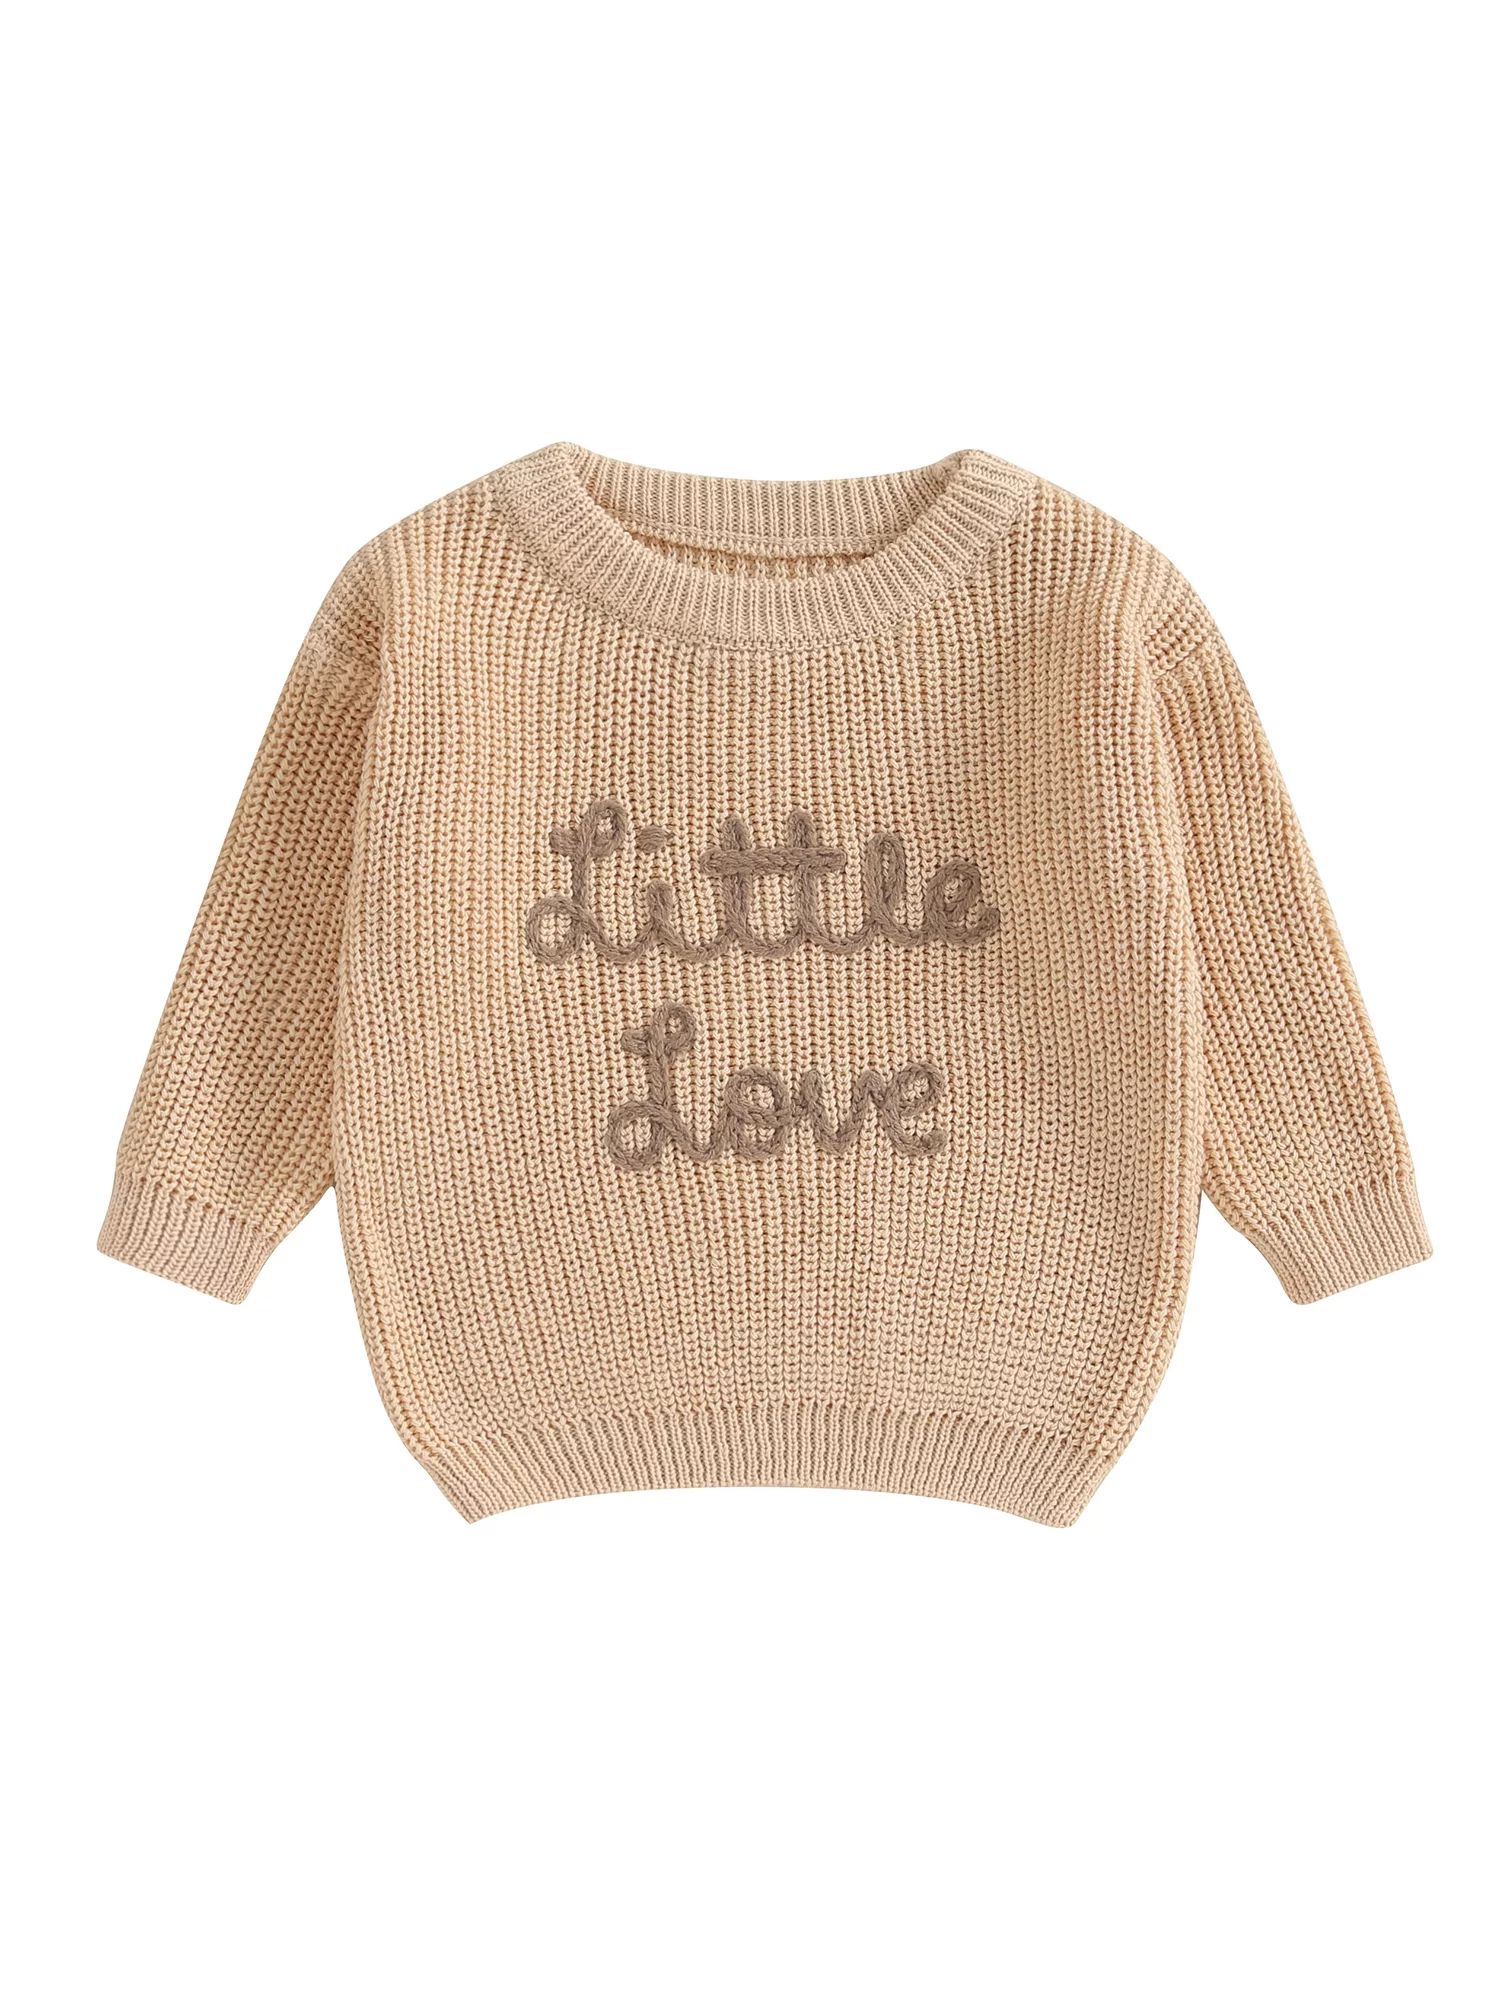 AIGUR Baby Girl Sweater, Long Sleeve Crew Neck Letters Winter Warm Knit Pullover Sweater Infant C... | Walmart (US)